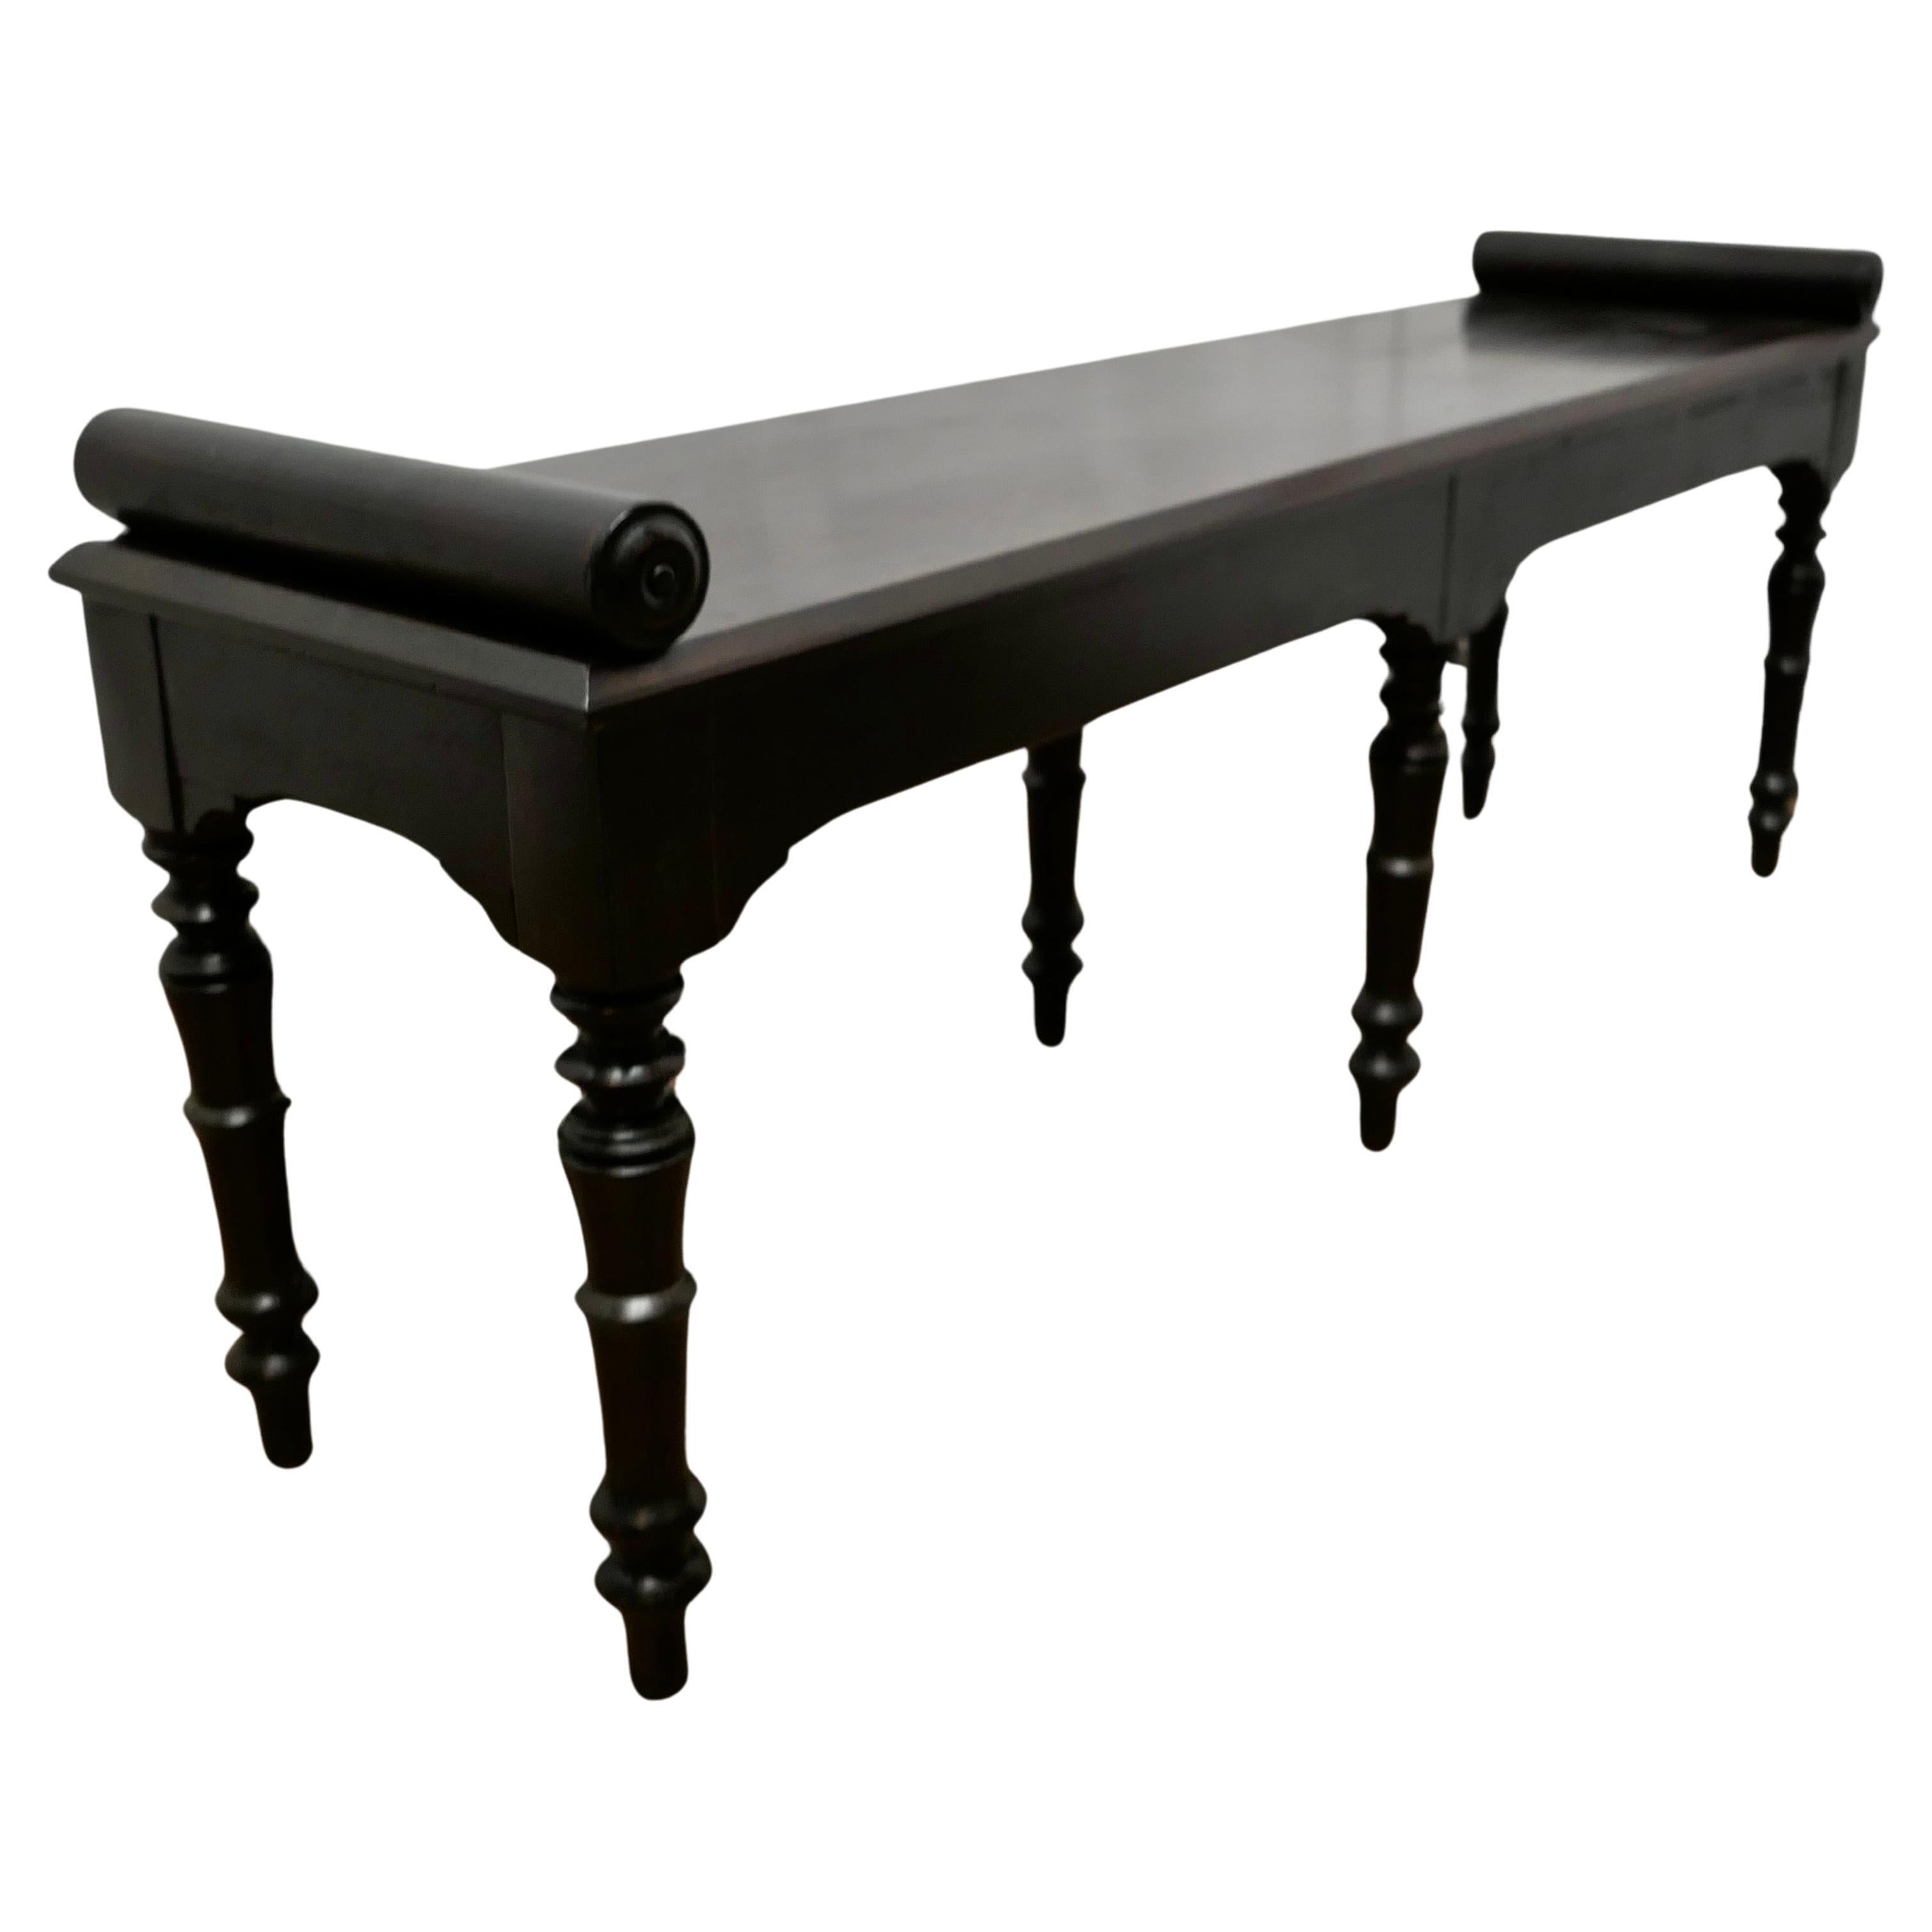 Superb Rosewood Willian IV Window Seat, Hall Bench For Sale